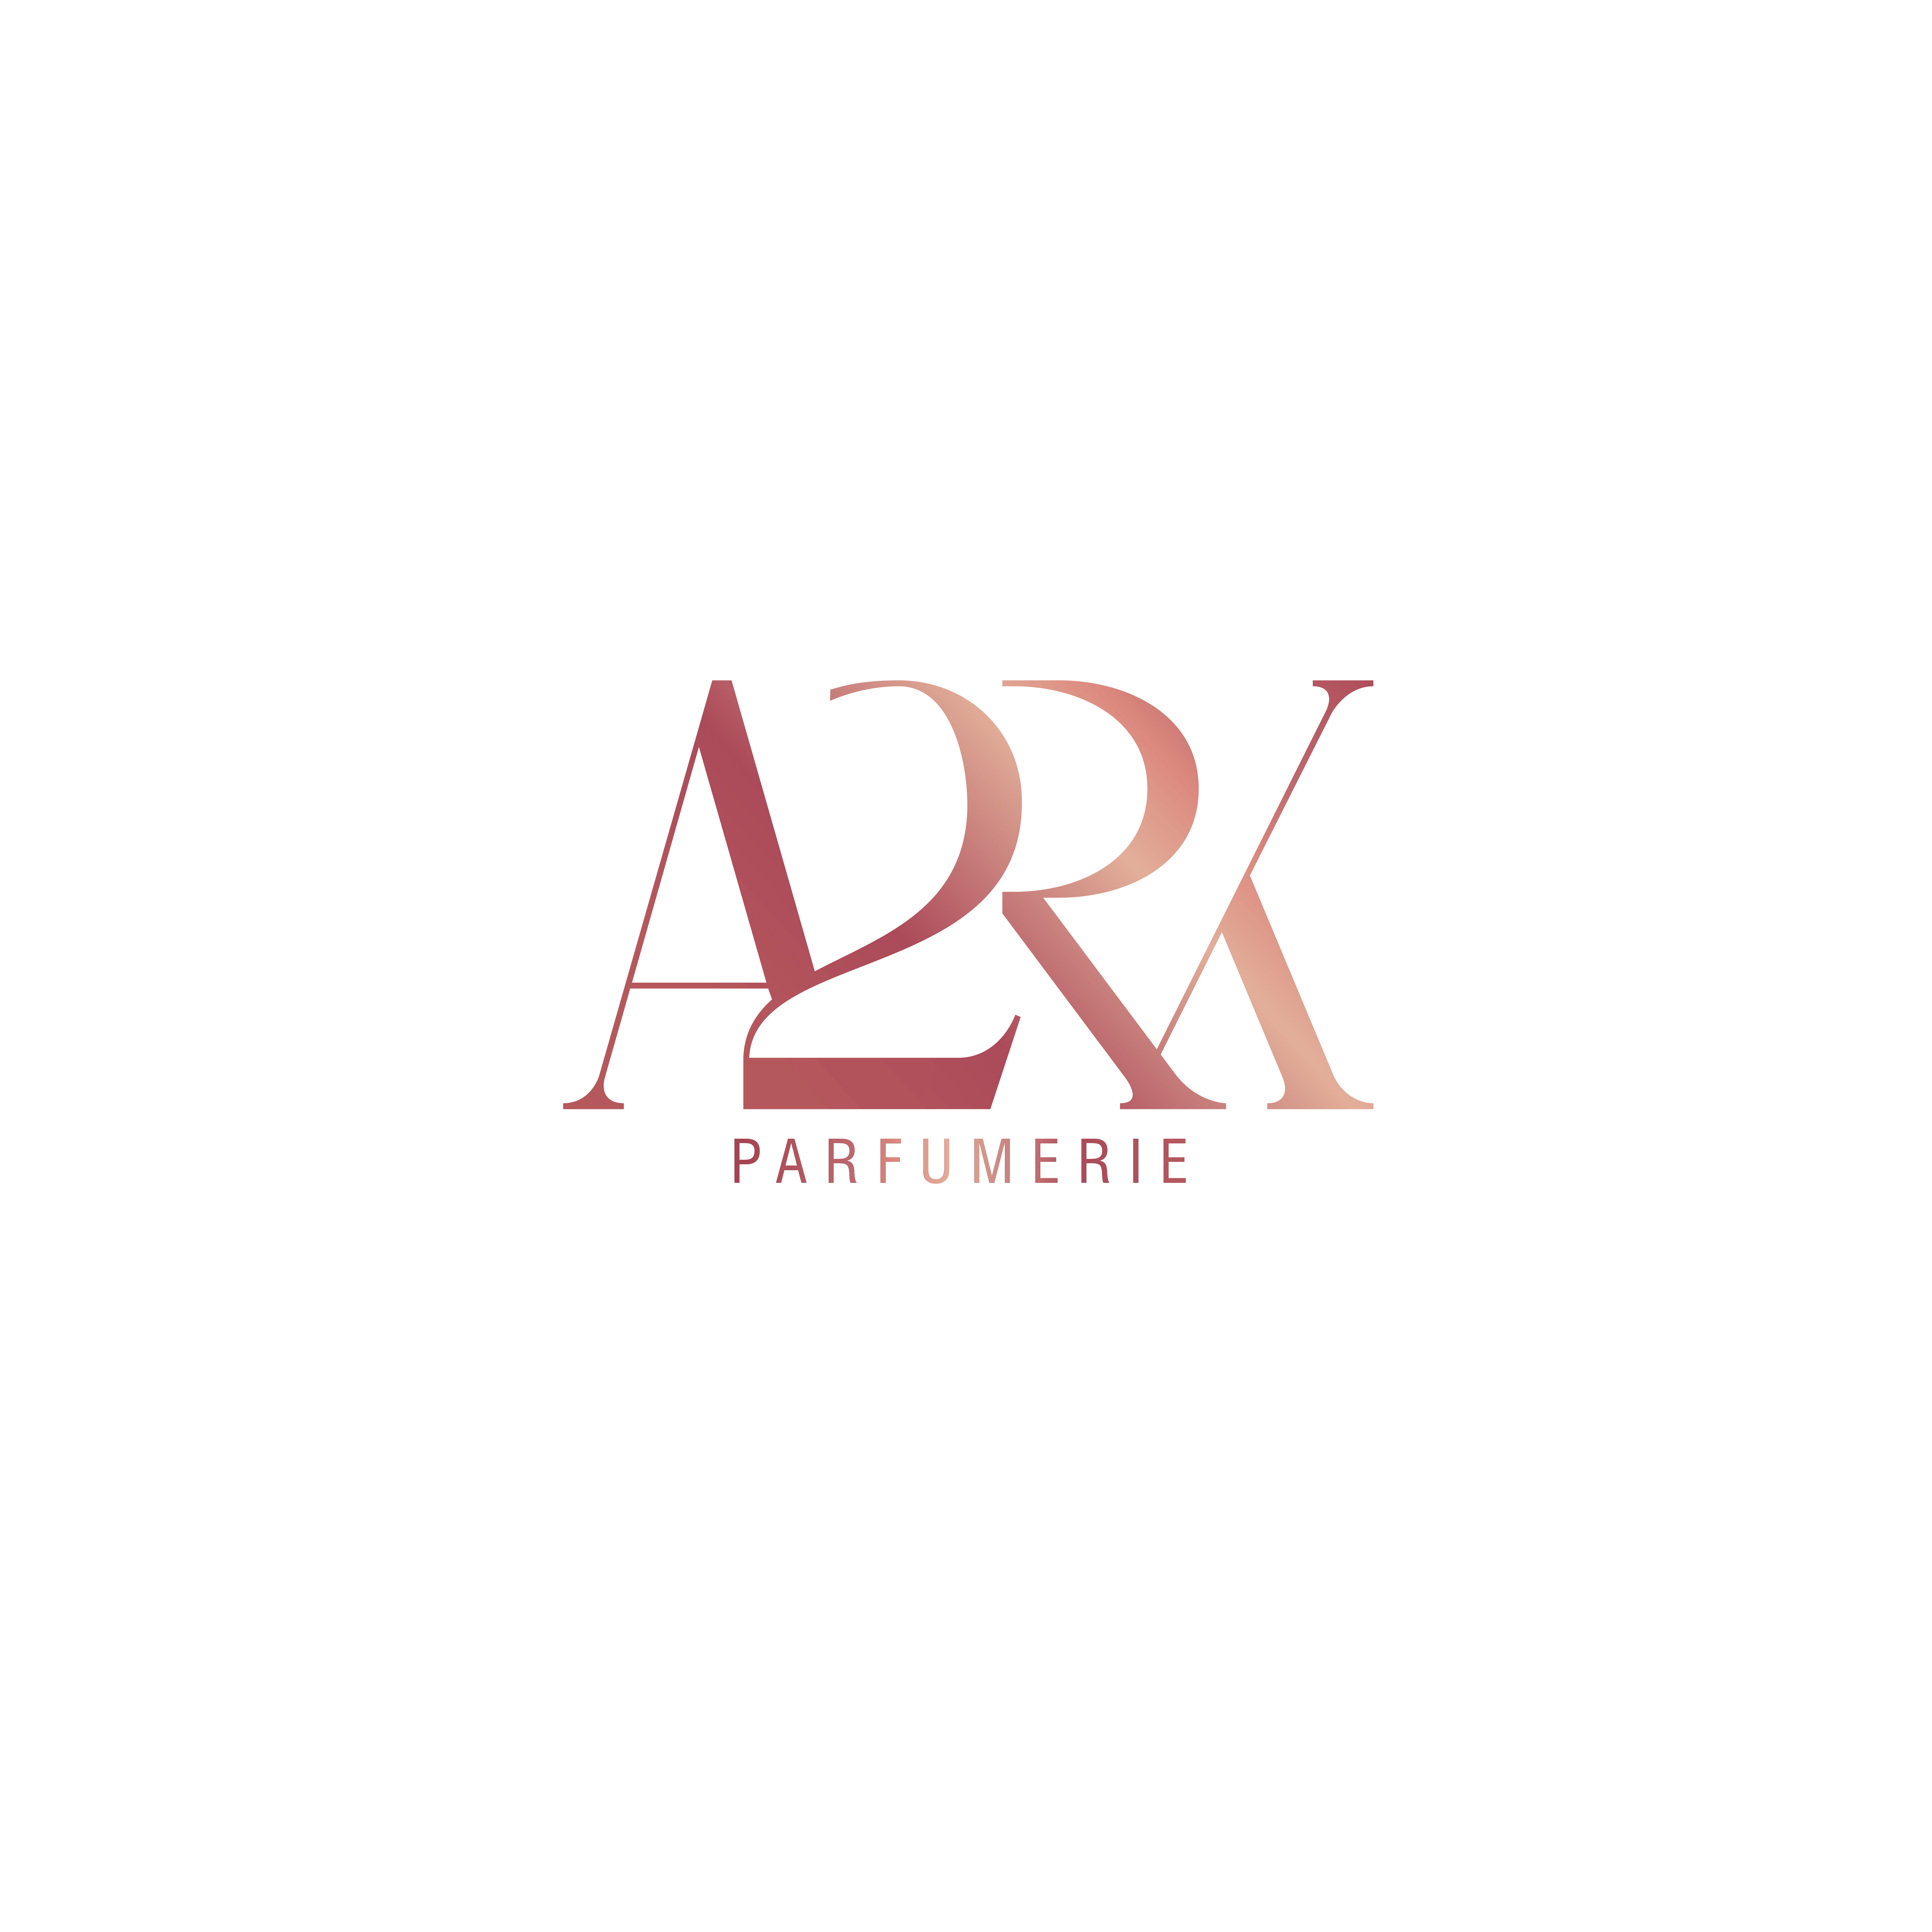 A2RK Parfumerie Aromatics, Oils and Scents